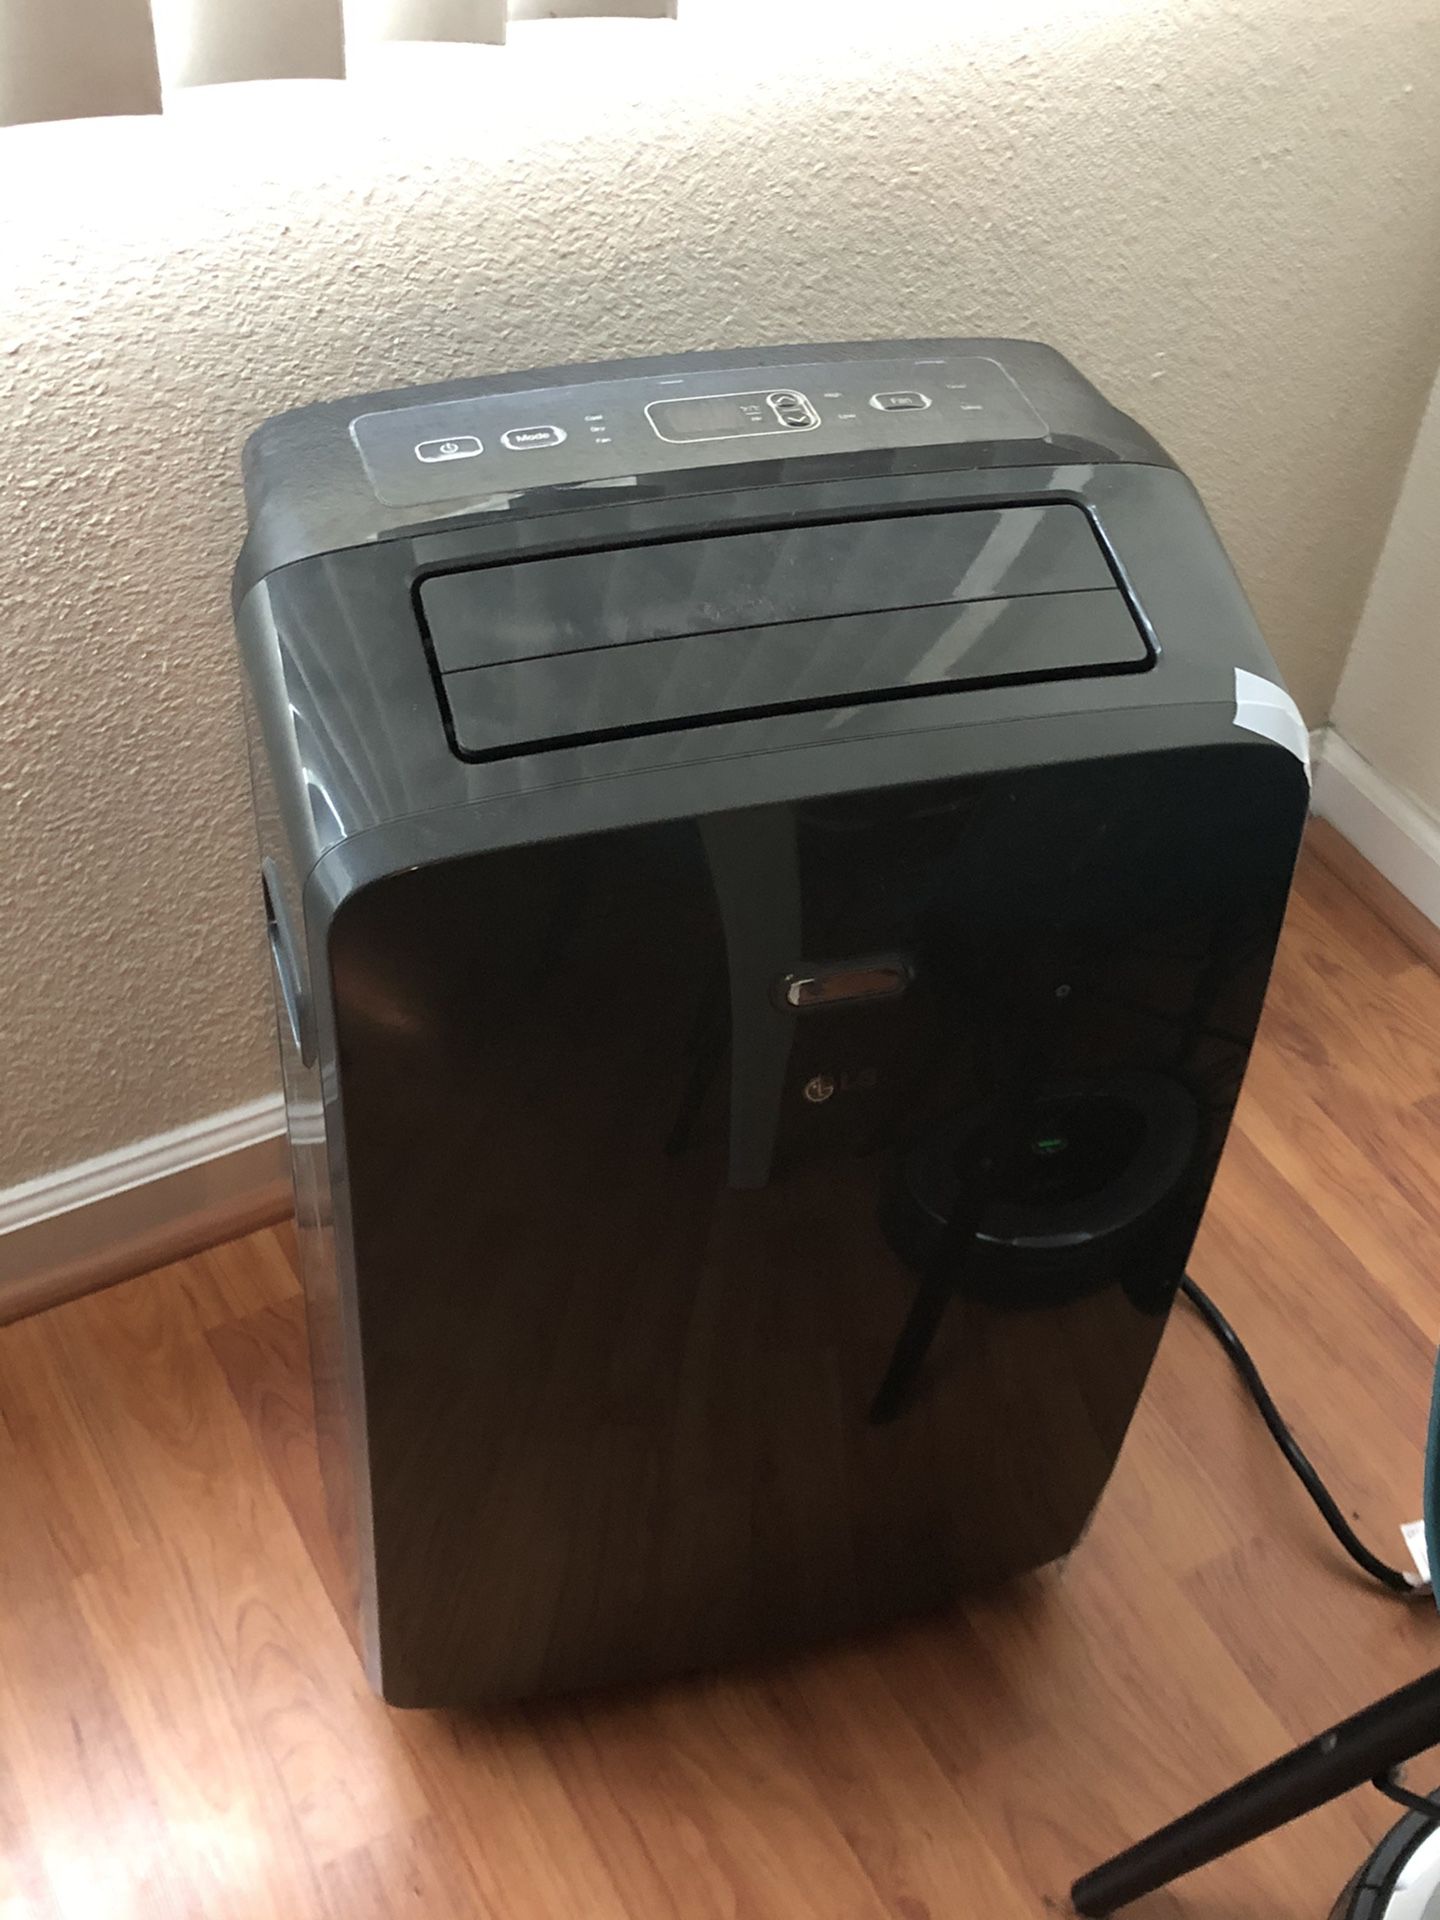 2019-LG- 400 sq ft Portable AC unit- priced to sell!